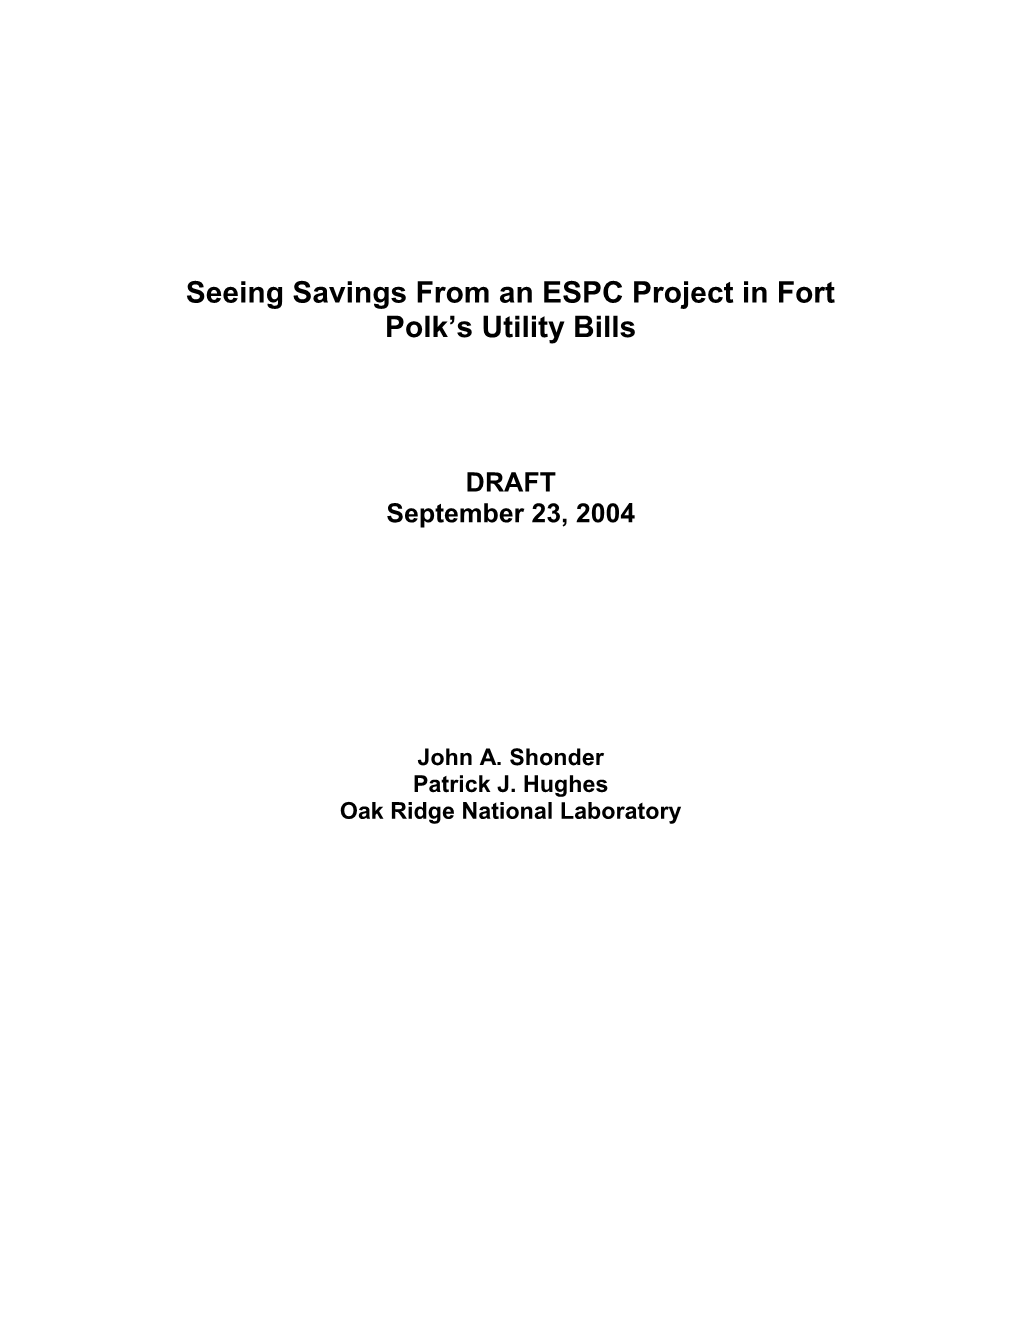 Utility Bill Analysis to Show Savings from an ESPC at Fort Polk